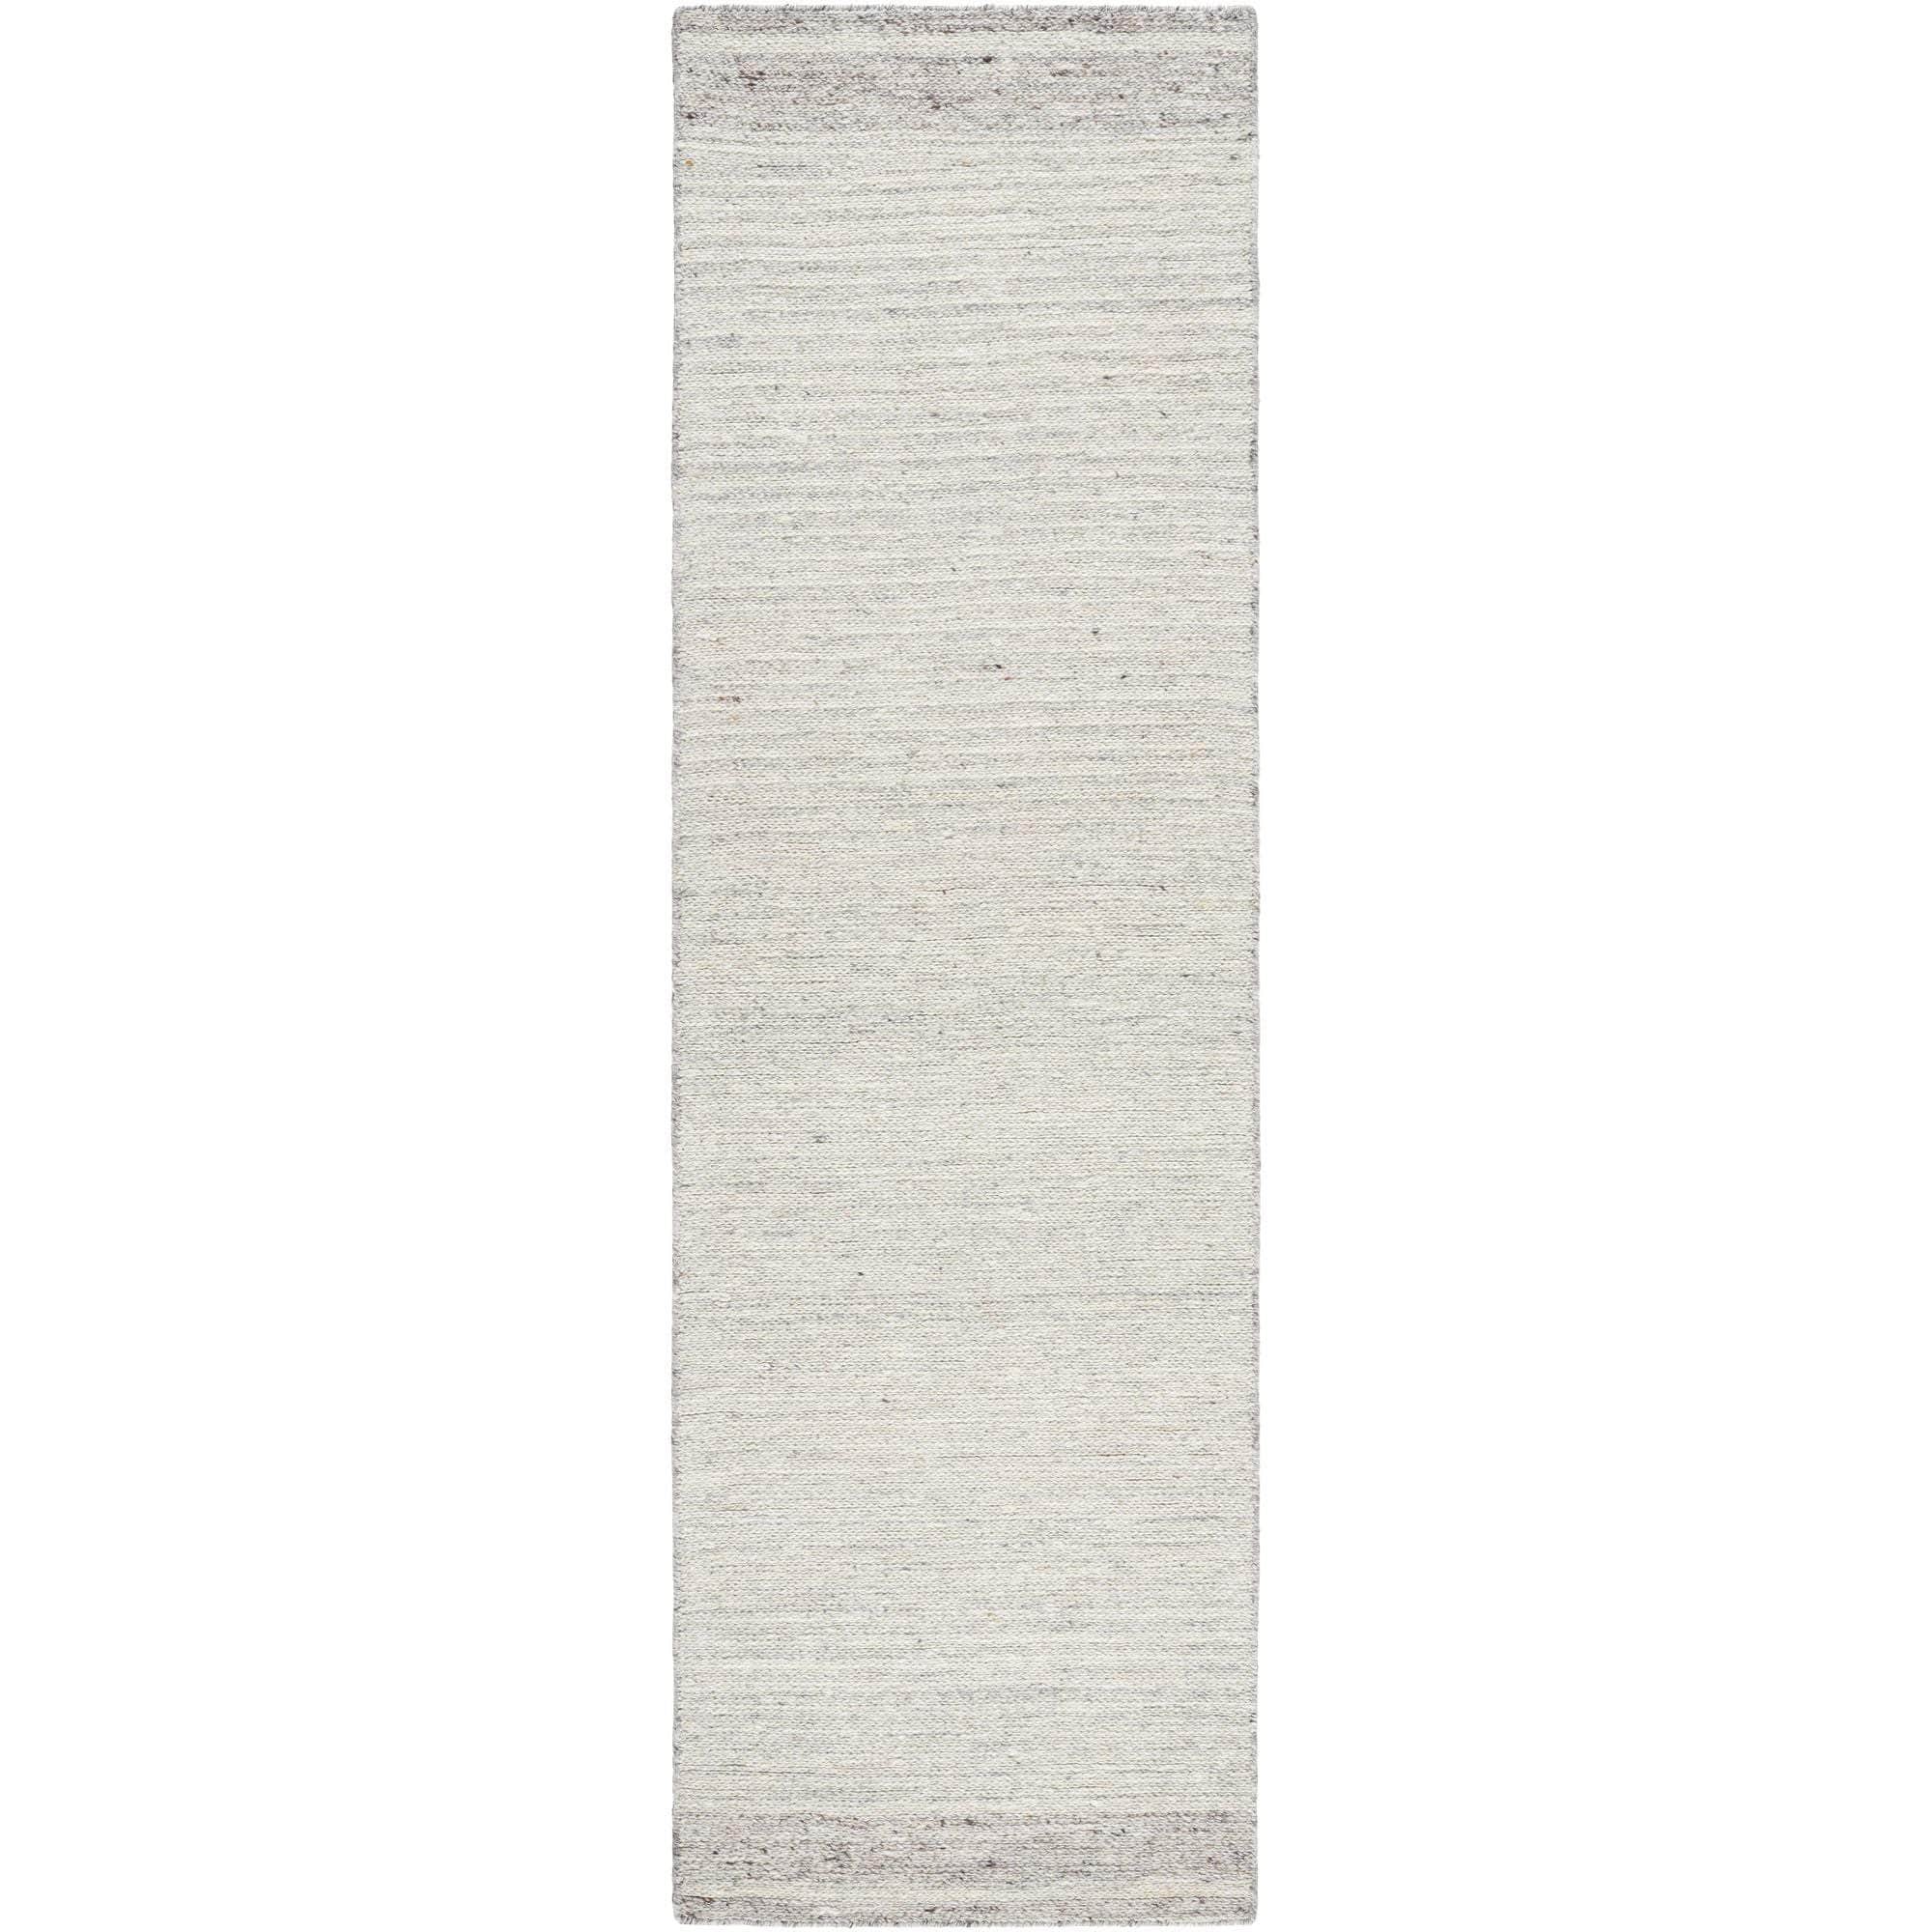 Handmade DRB-2301 Light Silver, Pearl, Ash Rugs #color_light silver, pearl, ash